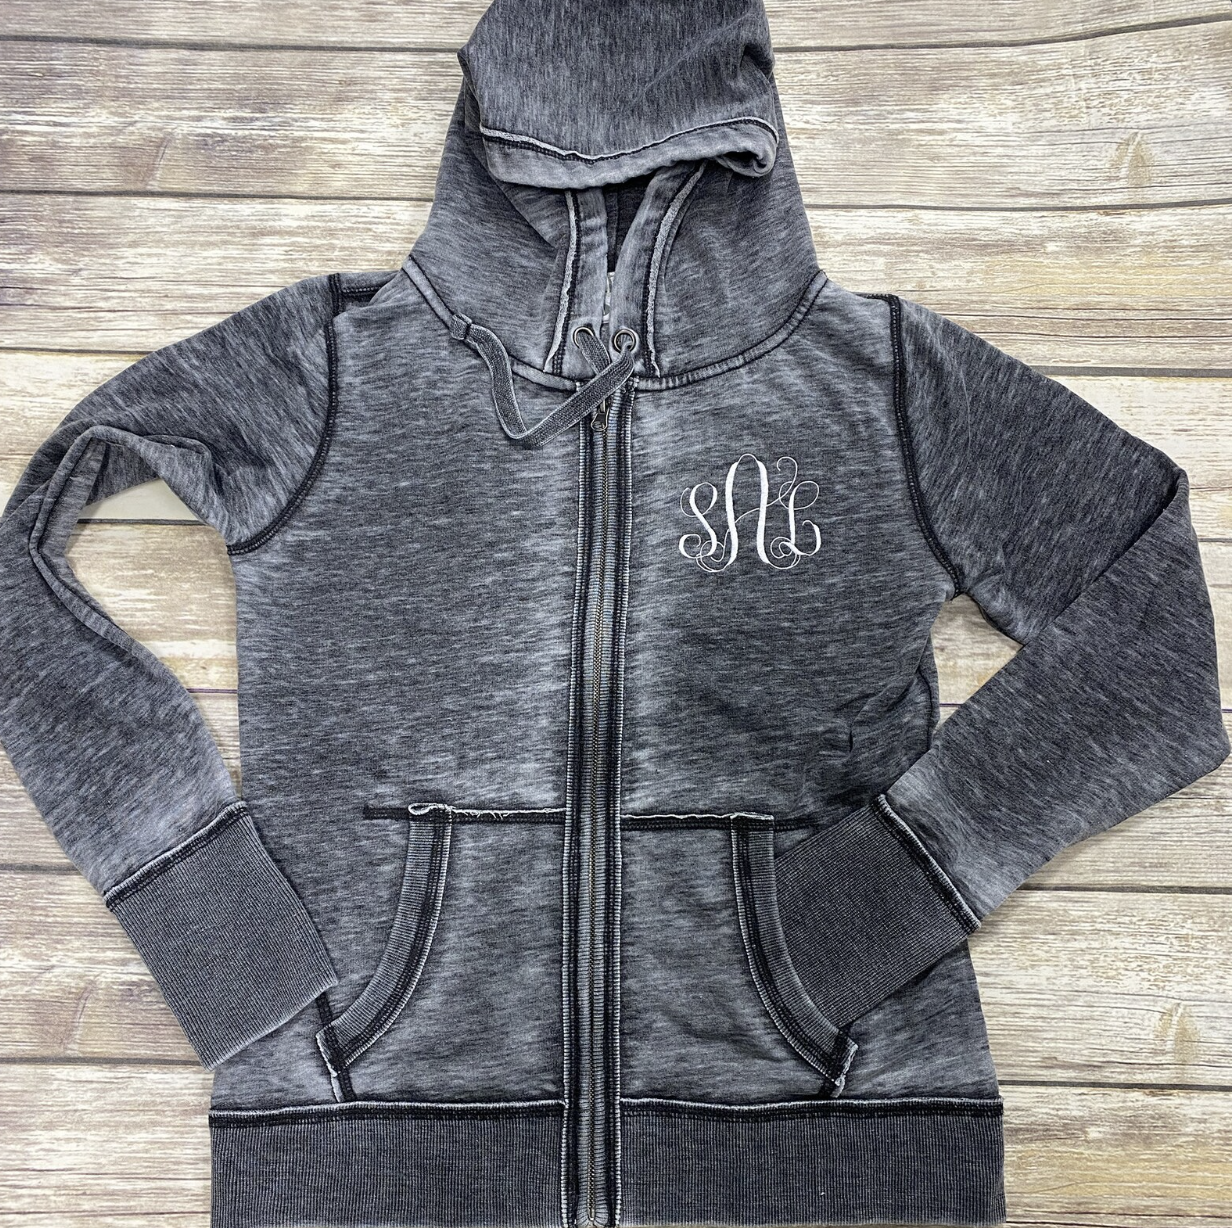 ACID WASHED HOODED ZIP UP JACKETS WITH FREE EMBROIDERY